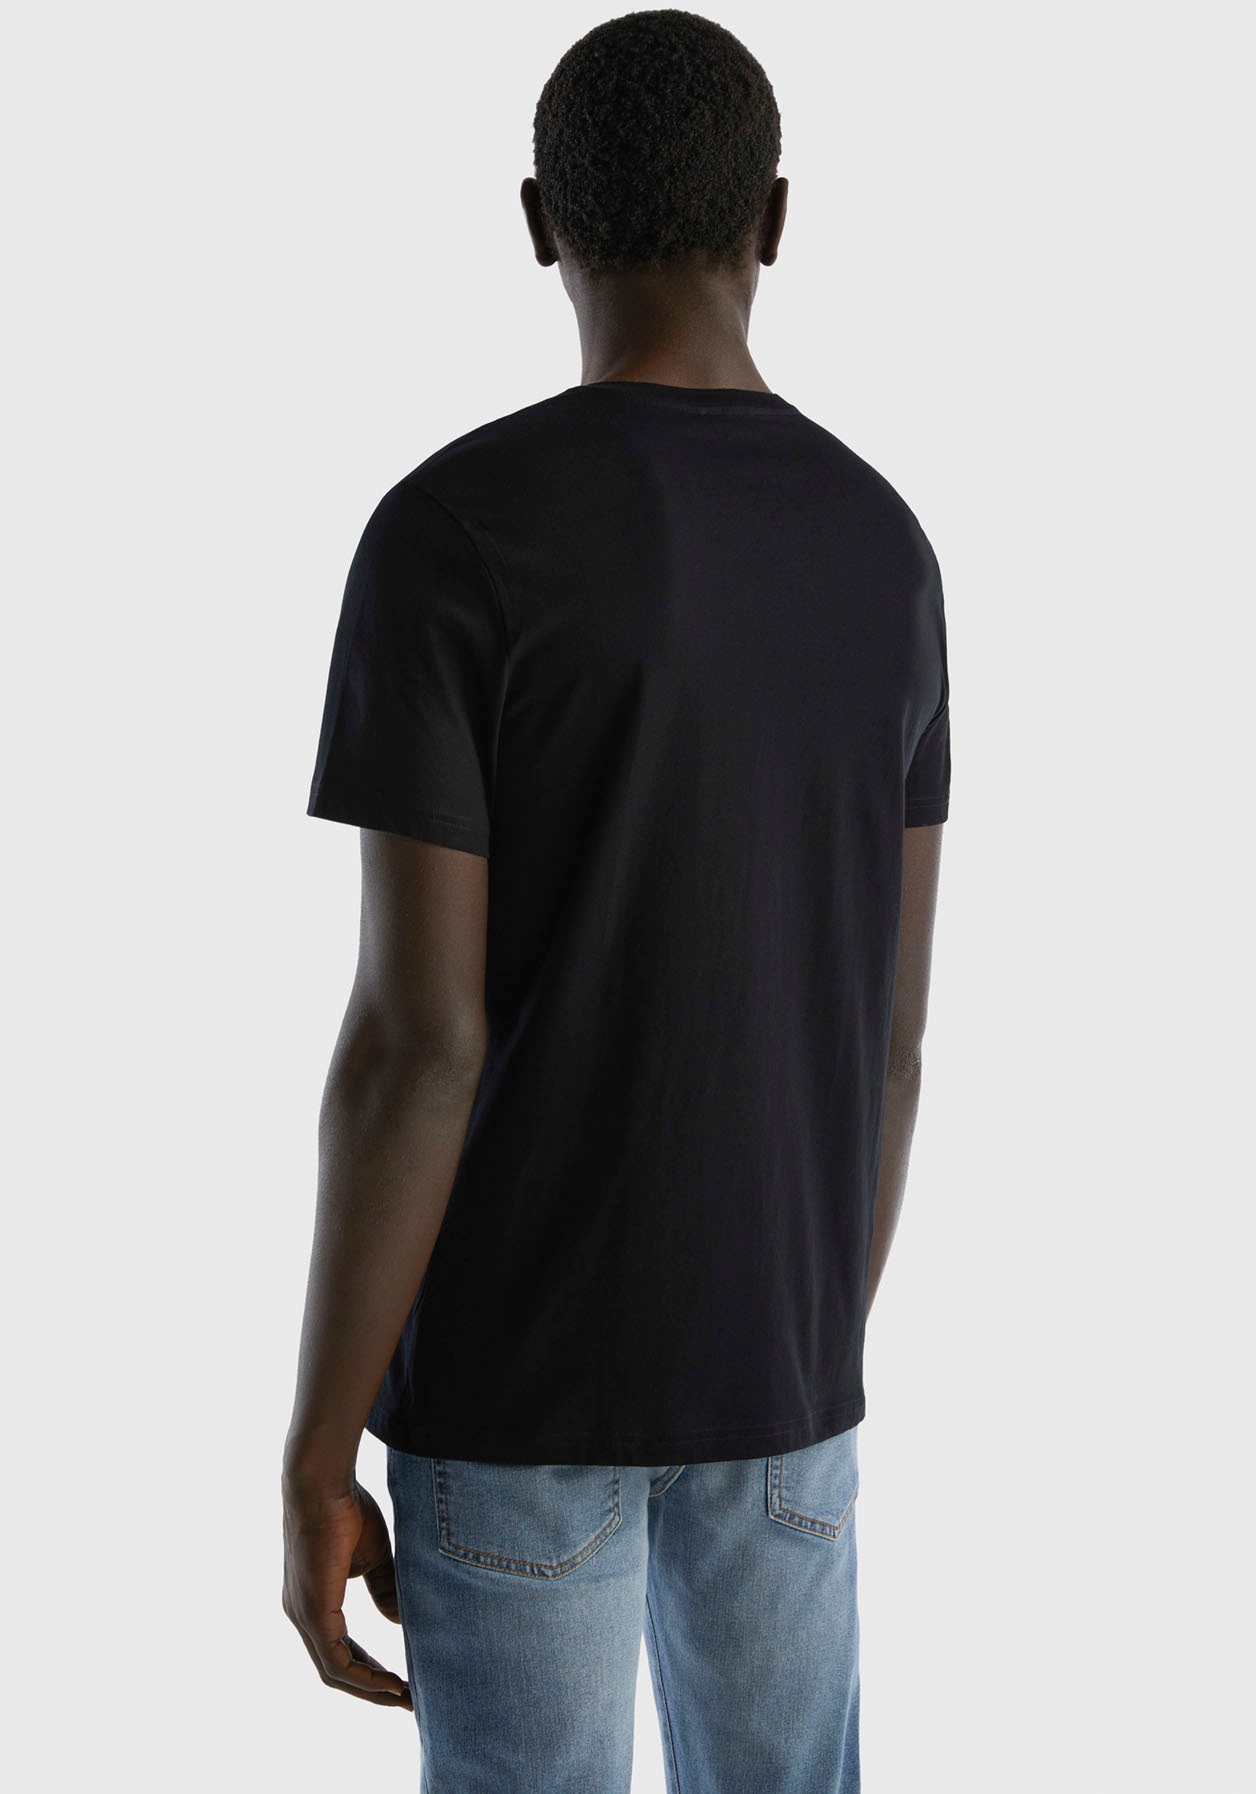 United Colors online Basic-Form shoppen T-Shirt, bei OTTO of in cleaner Benetton